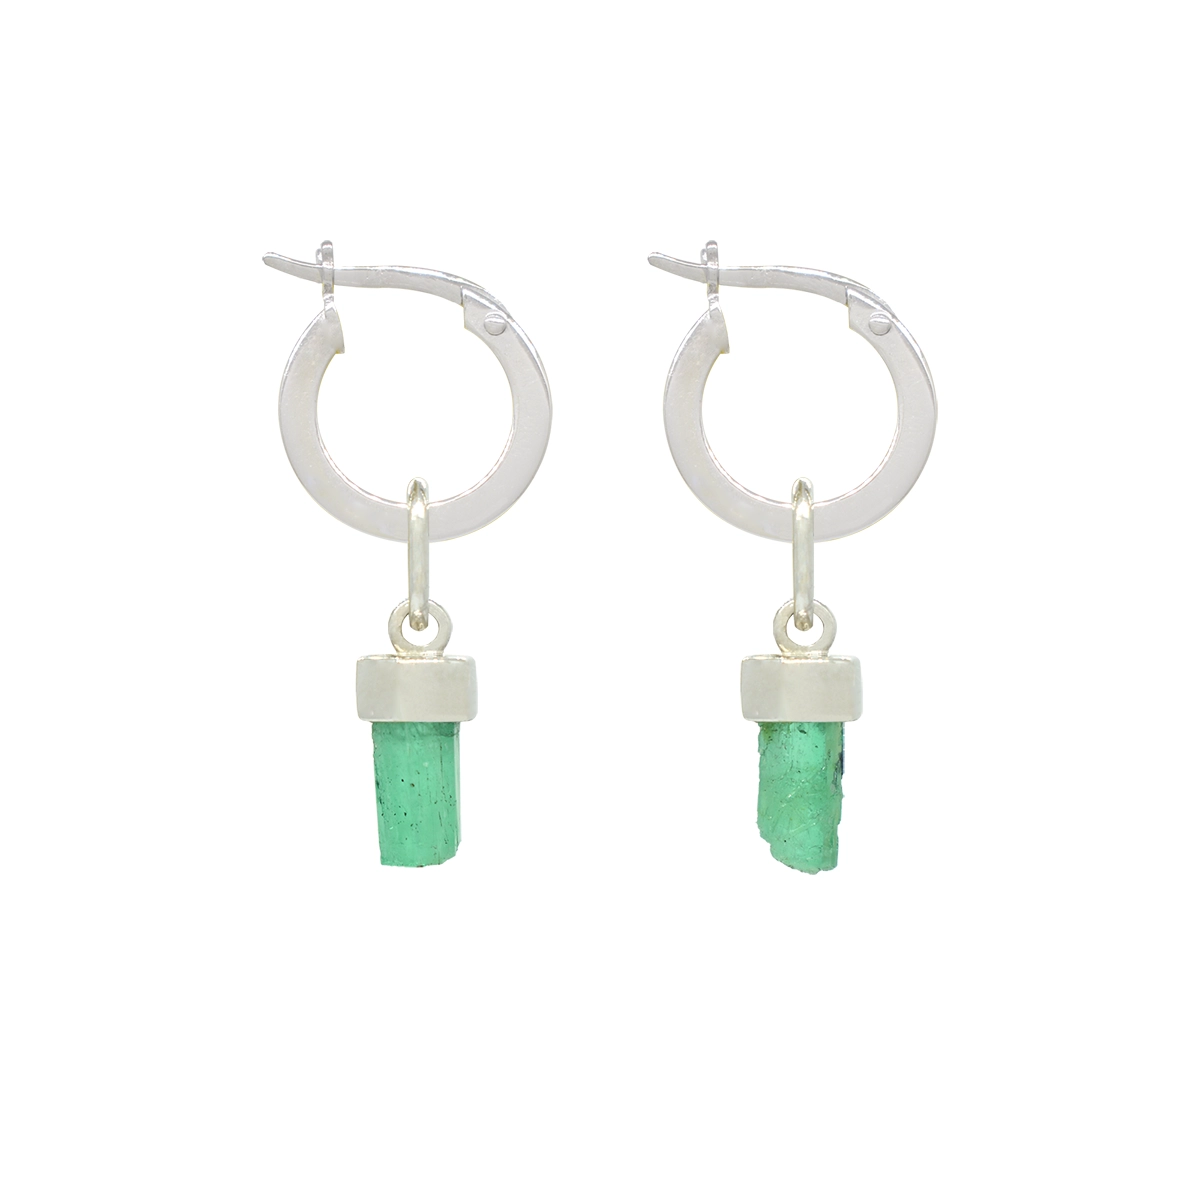 Circular dangle earrings in white gold with 2 raw green emeralds